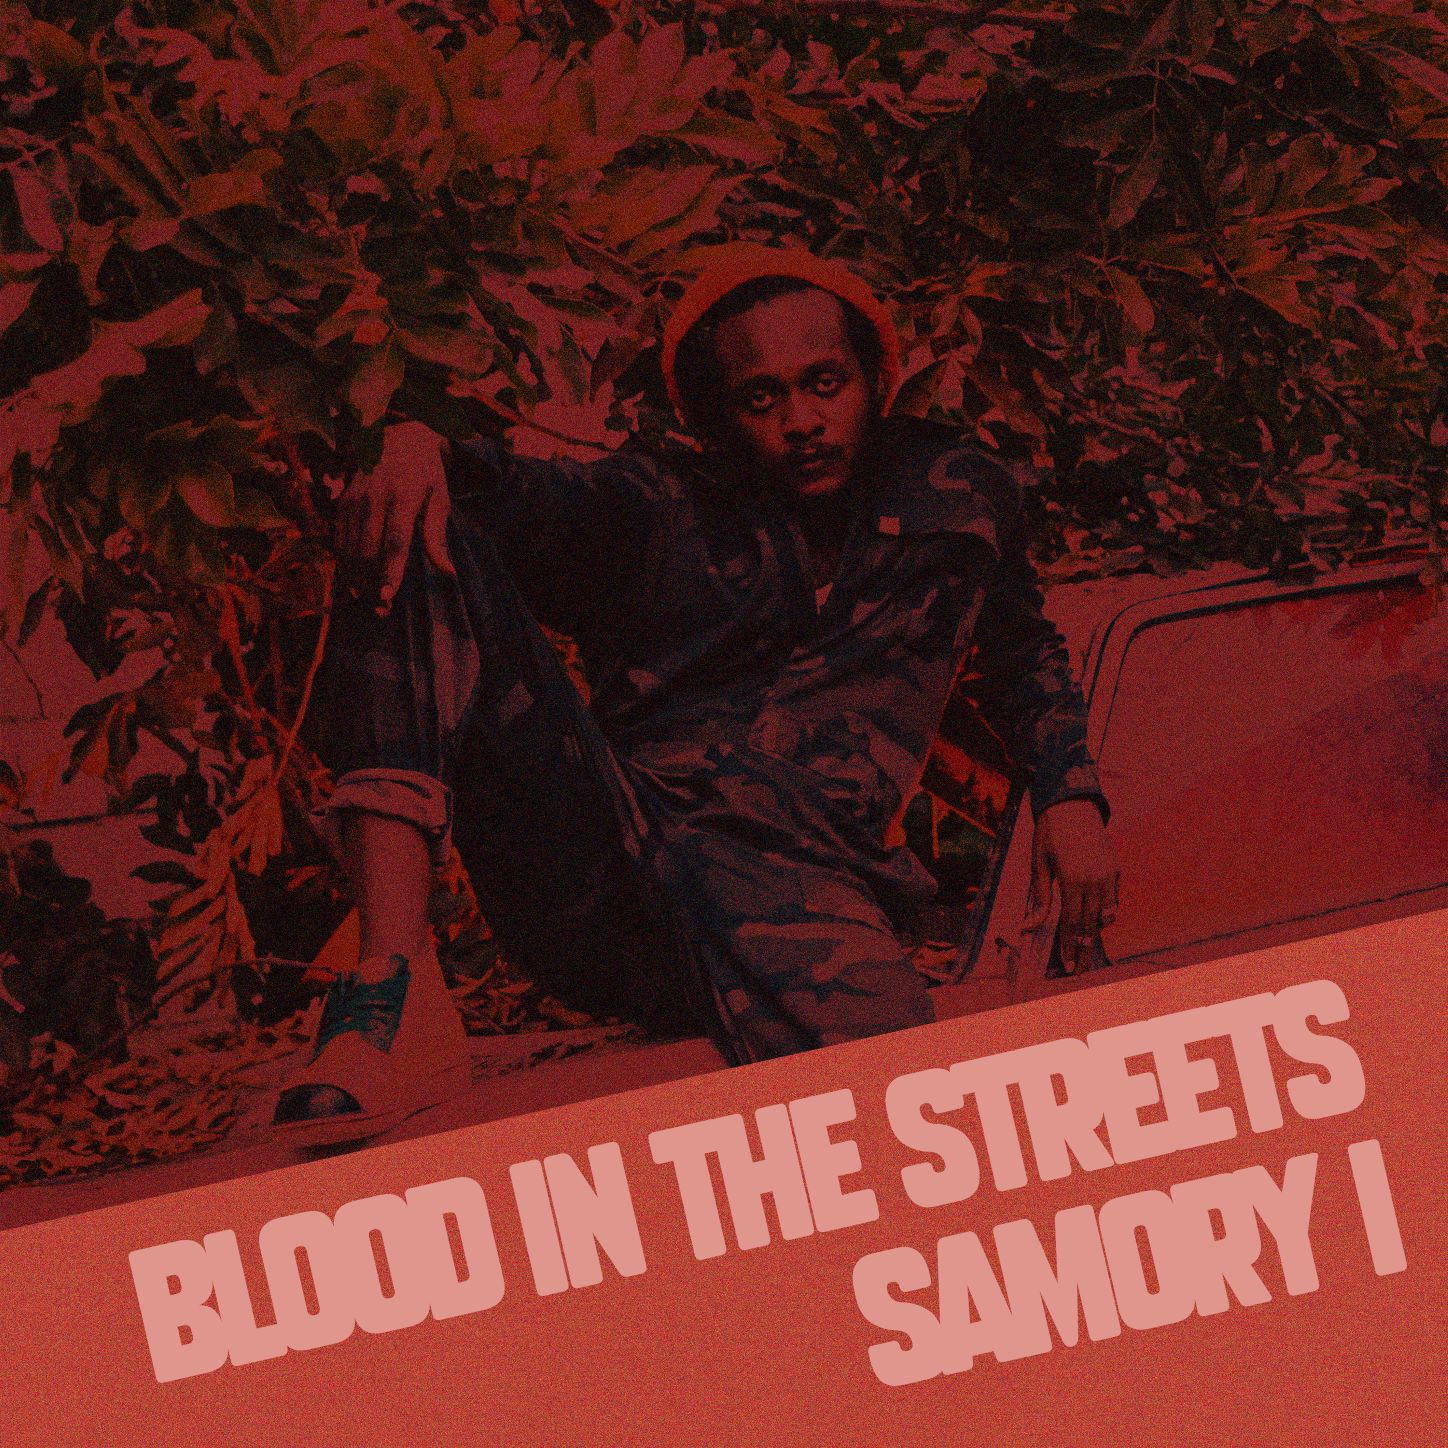 SAMORY I DECRIES THE “BLOOD IN THE STREETS” WITH HIS LATEST SINGLE